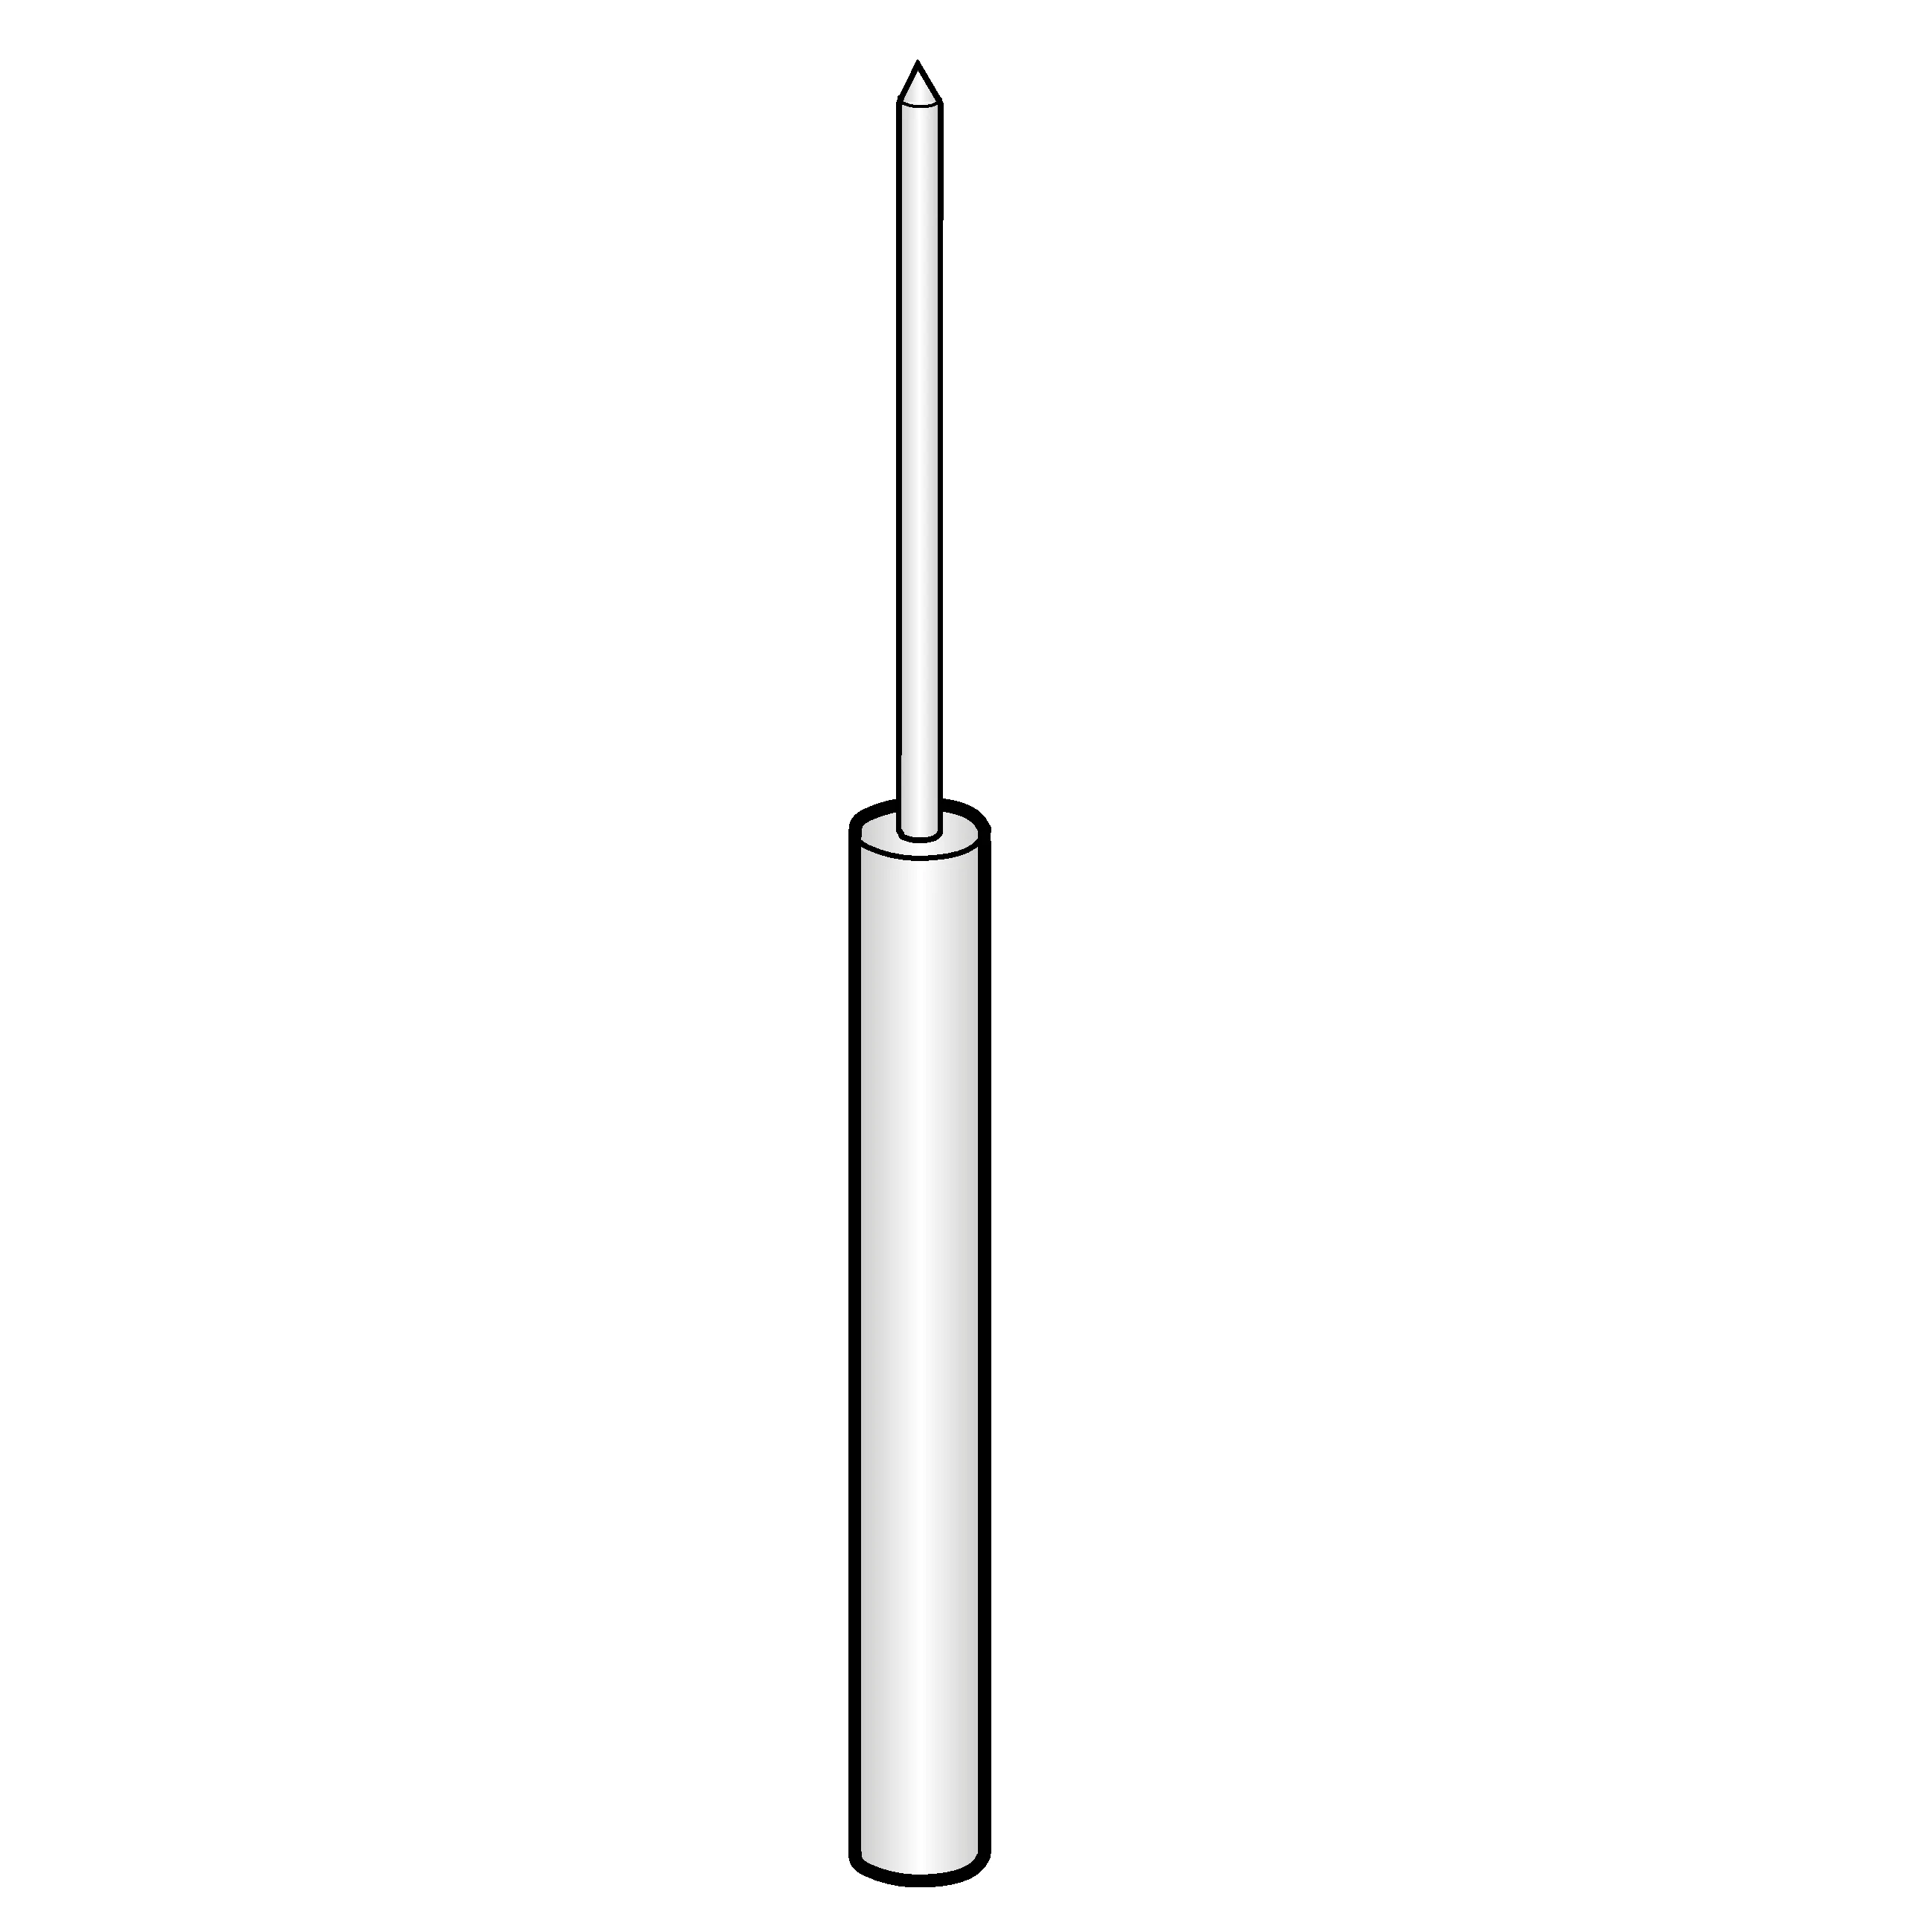 Eppendorf Unlocking tool, for opening the 1,200 µL multi-channel lower parts